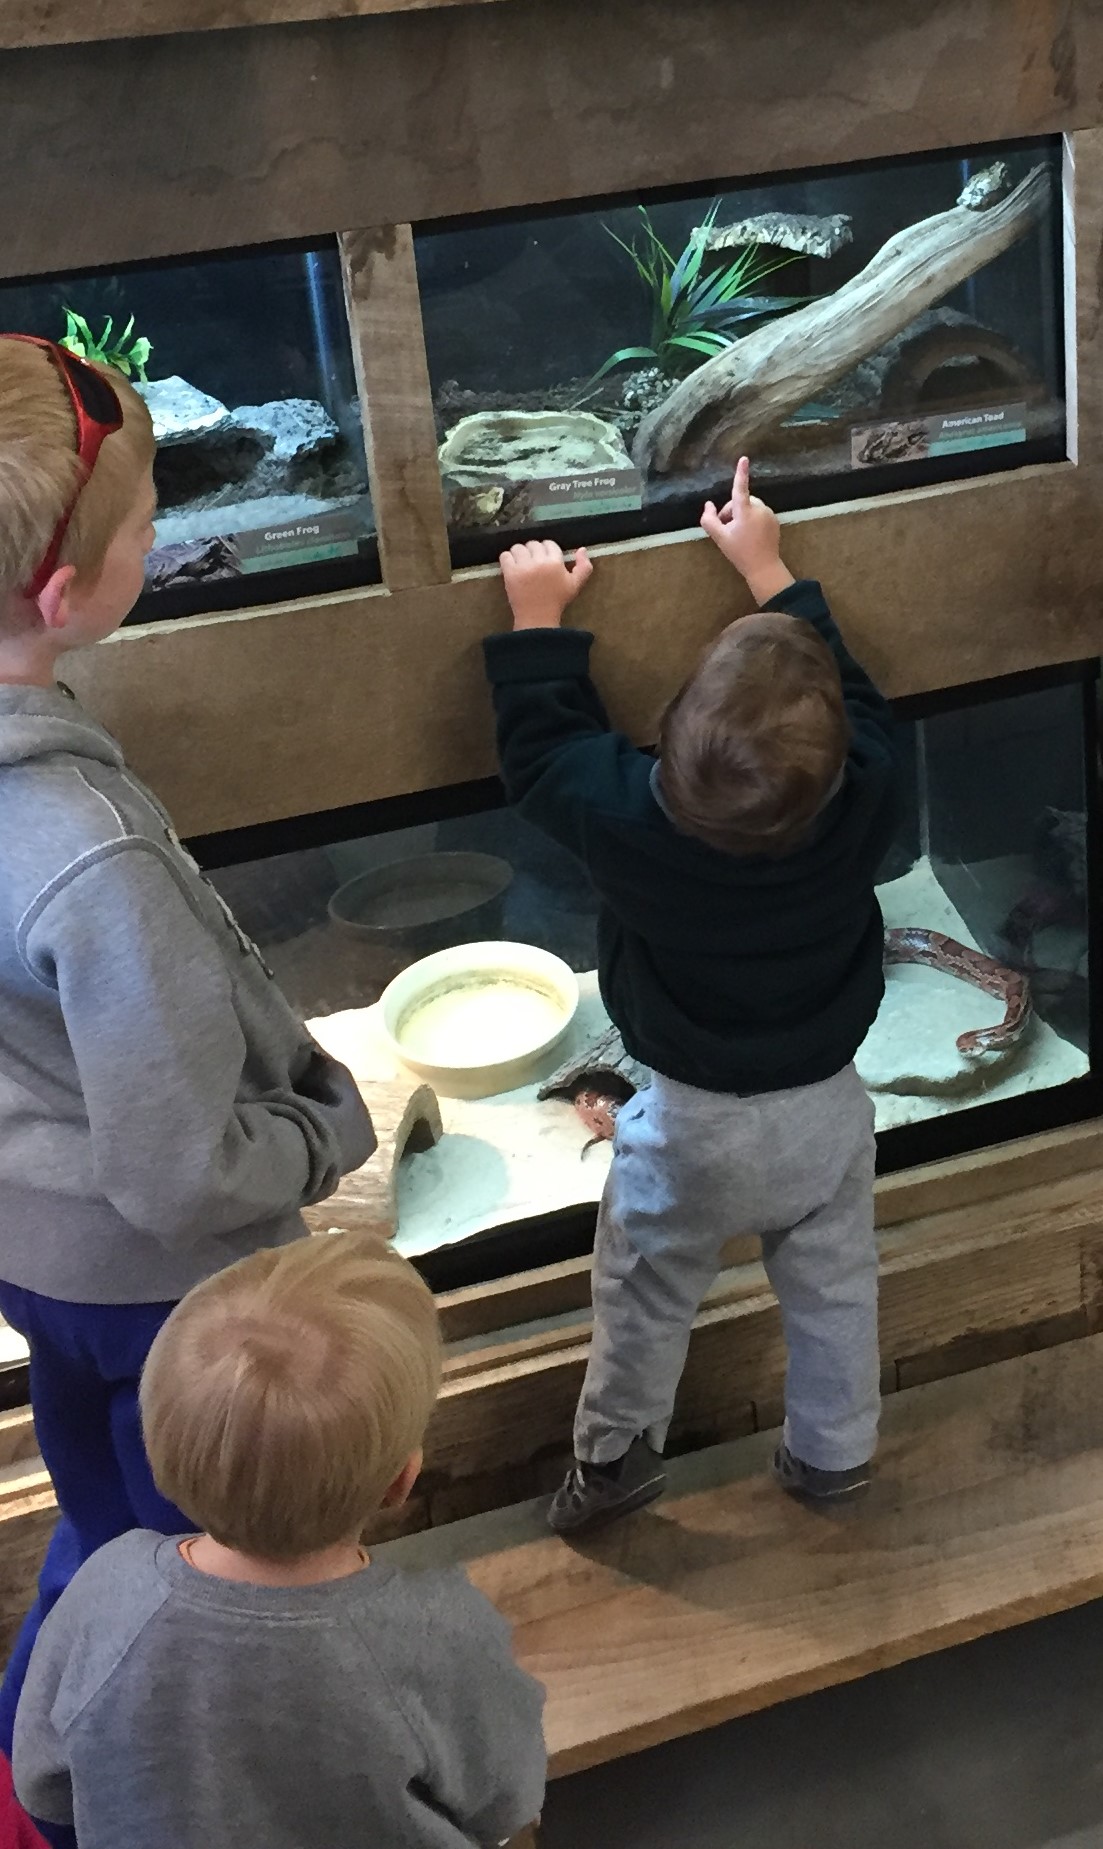 Exhibits are low enough for children to view.